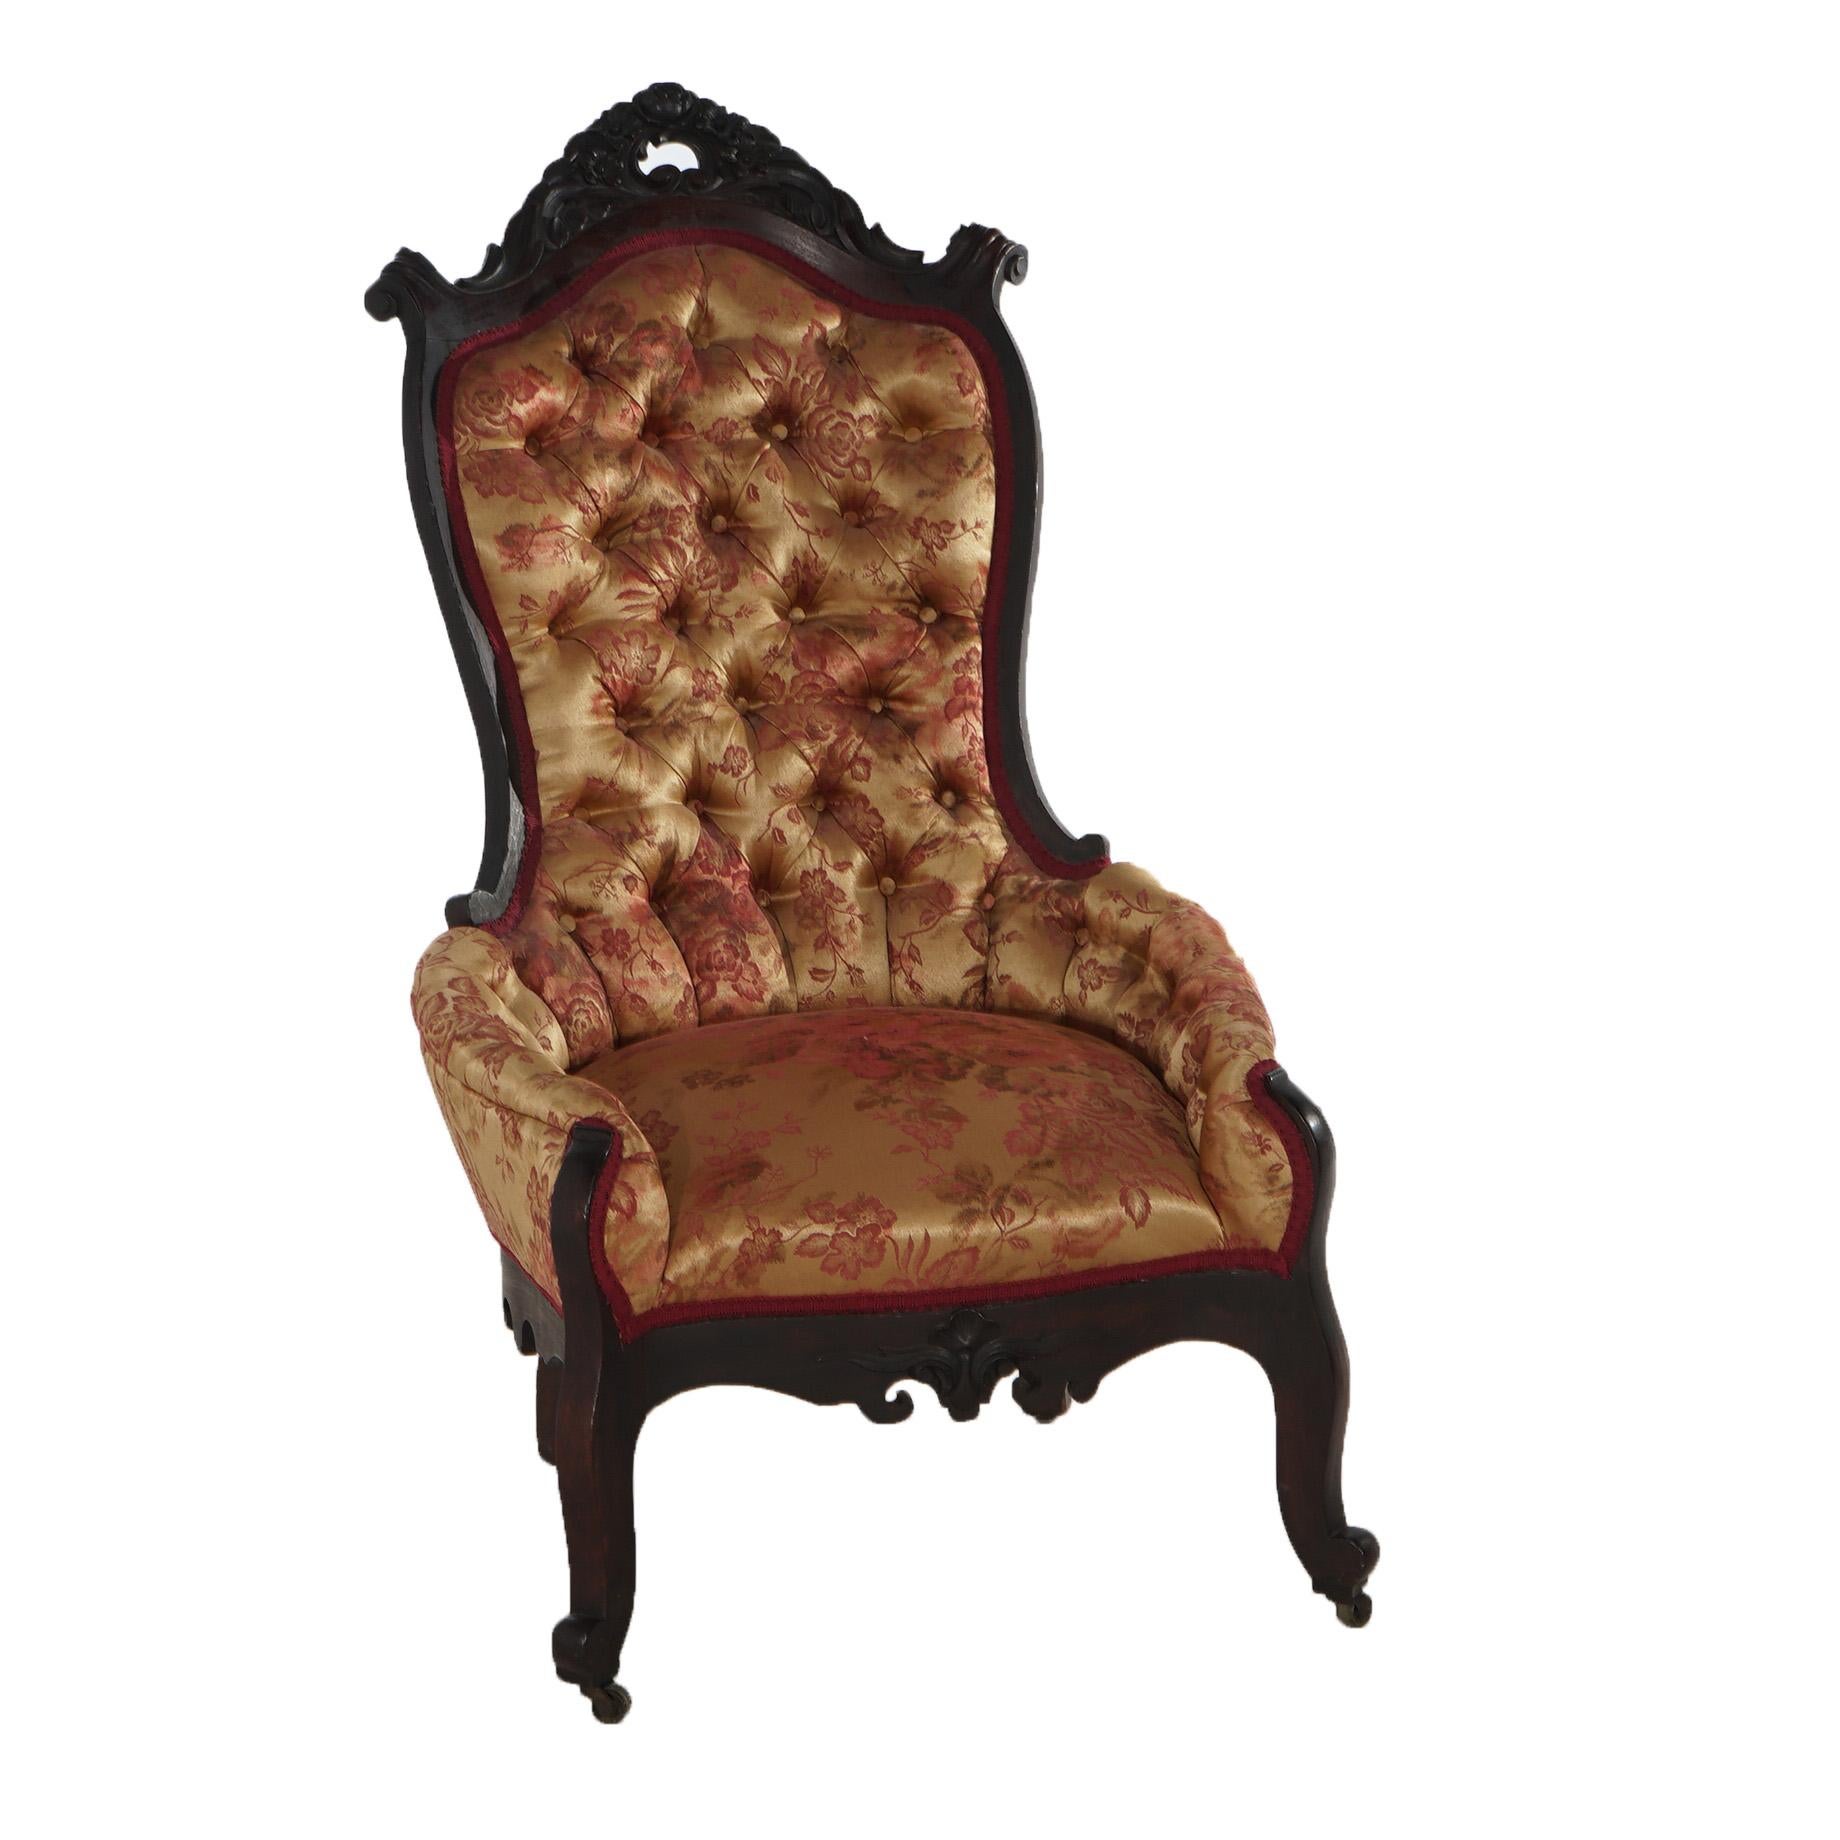 Antique Victorian Carved Walnut & Upholstered Lady’s Boudoir Chair C1890 For Sale 6